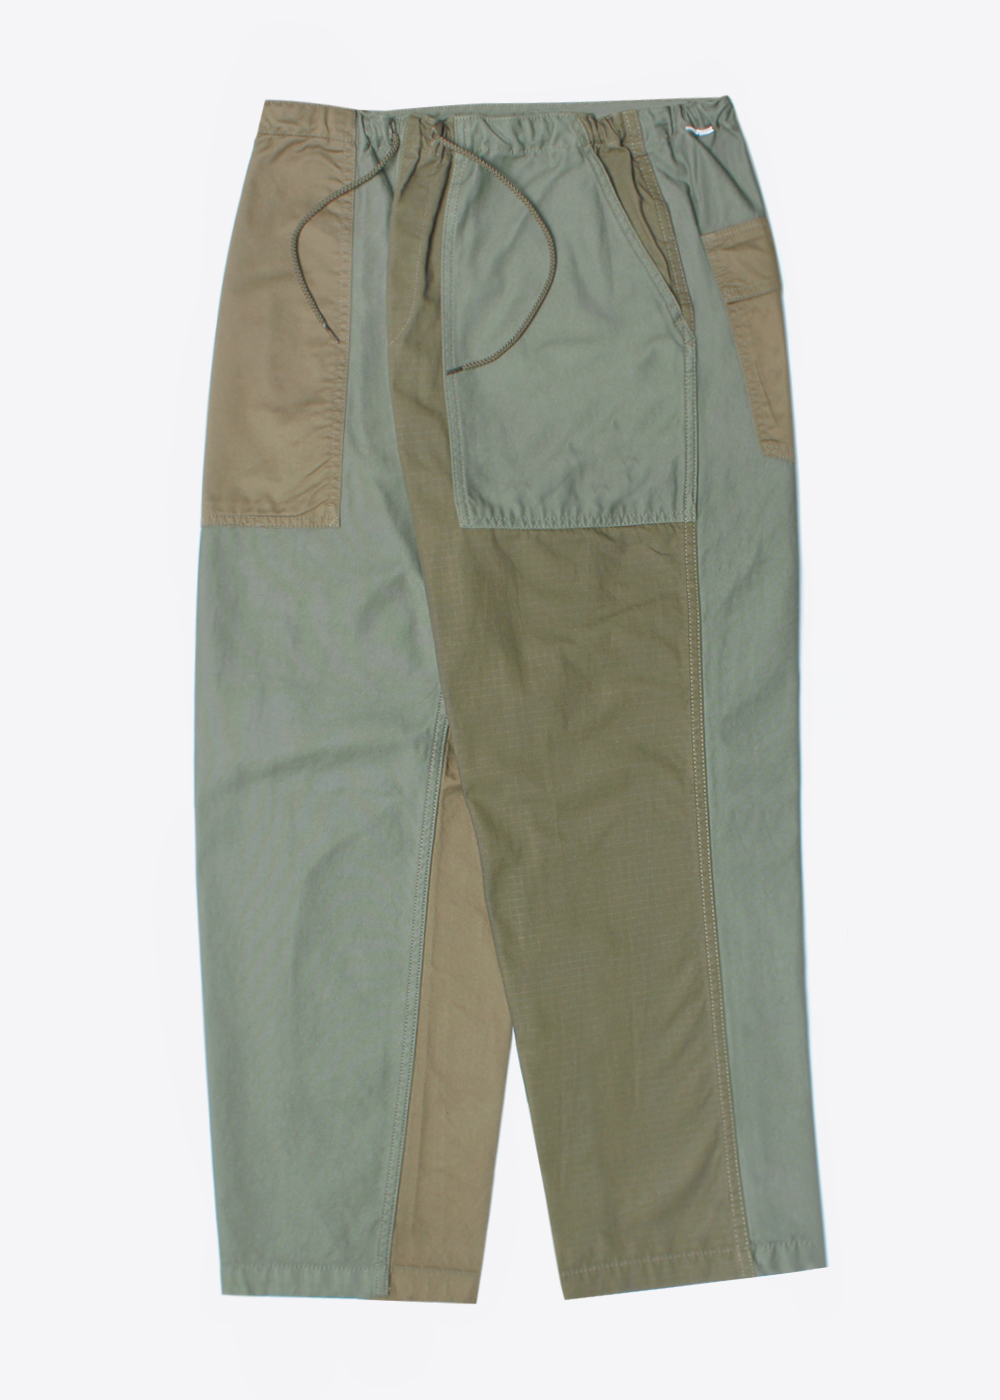 GUNG HO’loose straight fit’ patchwork fatigue pant